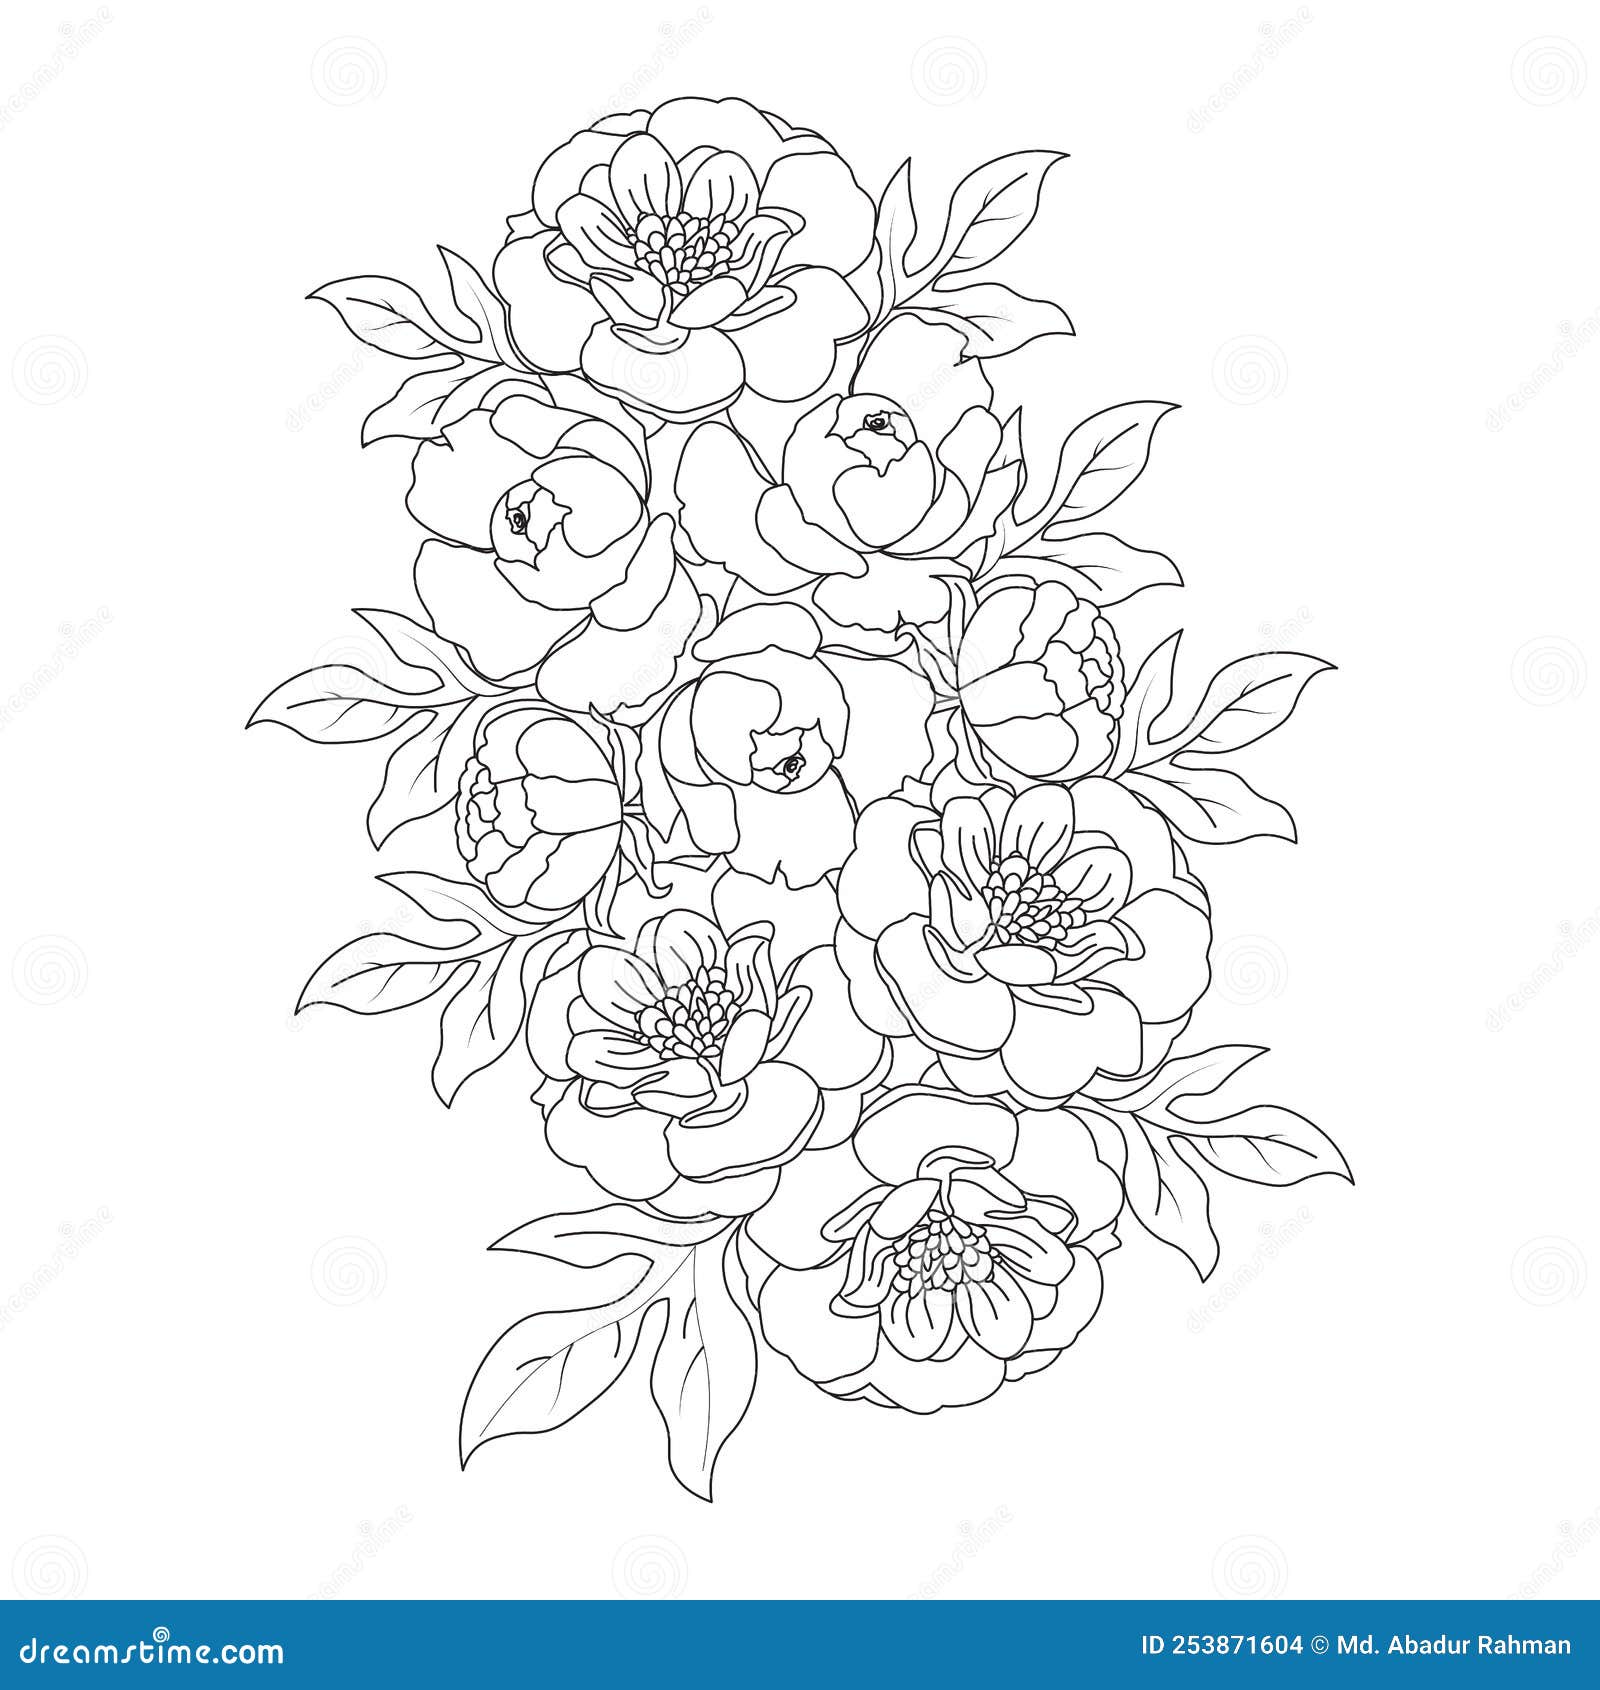 Rose flower drawing is easy for kids pencil draw Vector Image